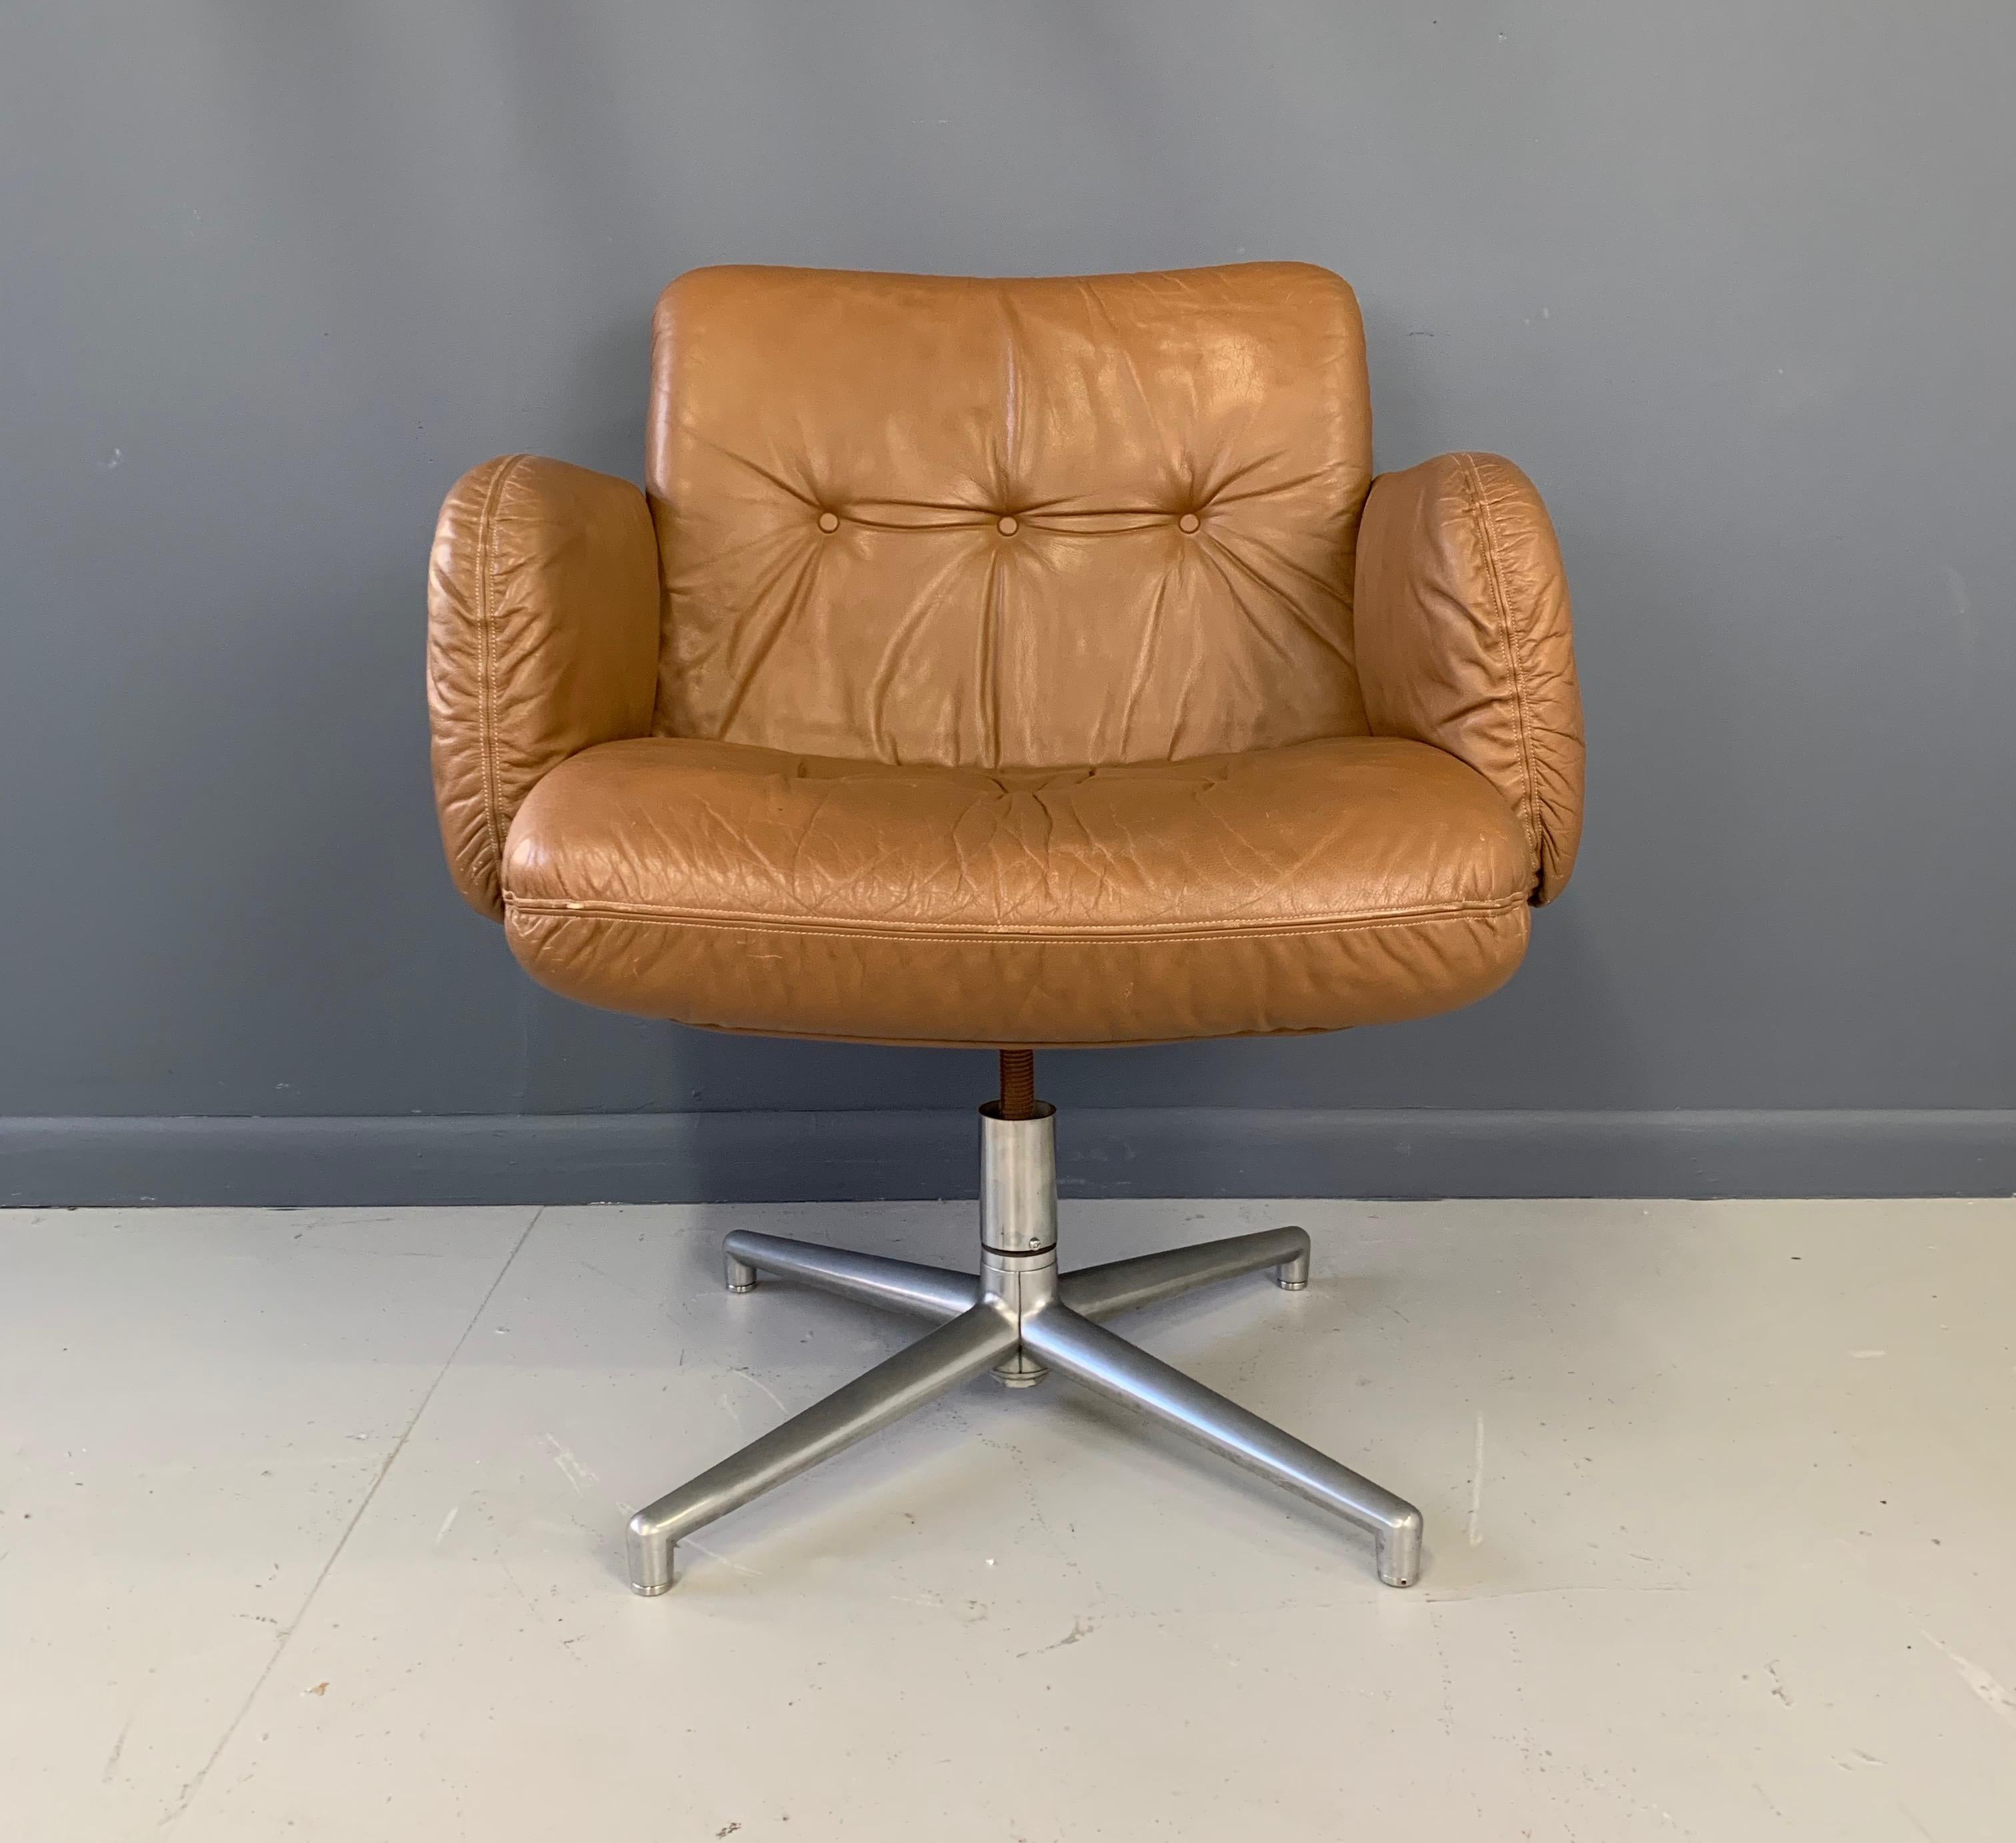 This beautiful chair covered in tan leather has a three button back and armrests it swivels on its aluminum base. This chair has been lovingly worn in and the leather is soft and supple showing minimal wear.
         